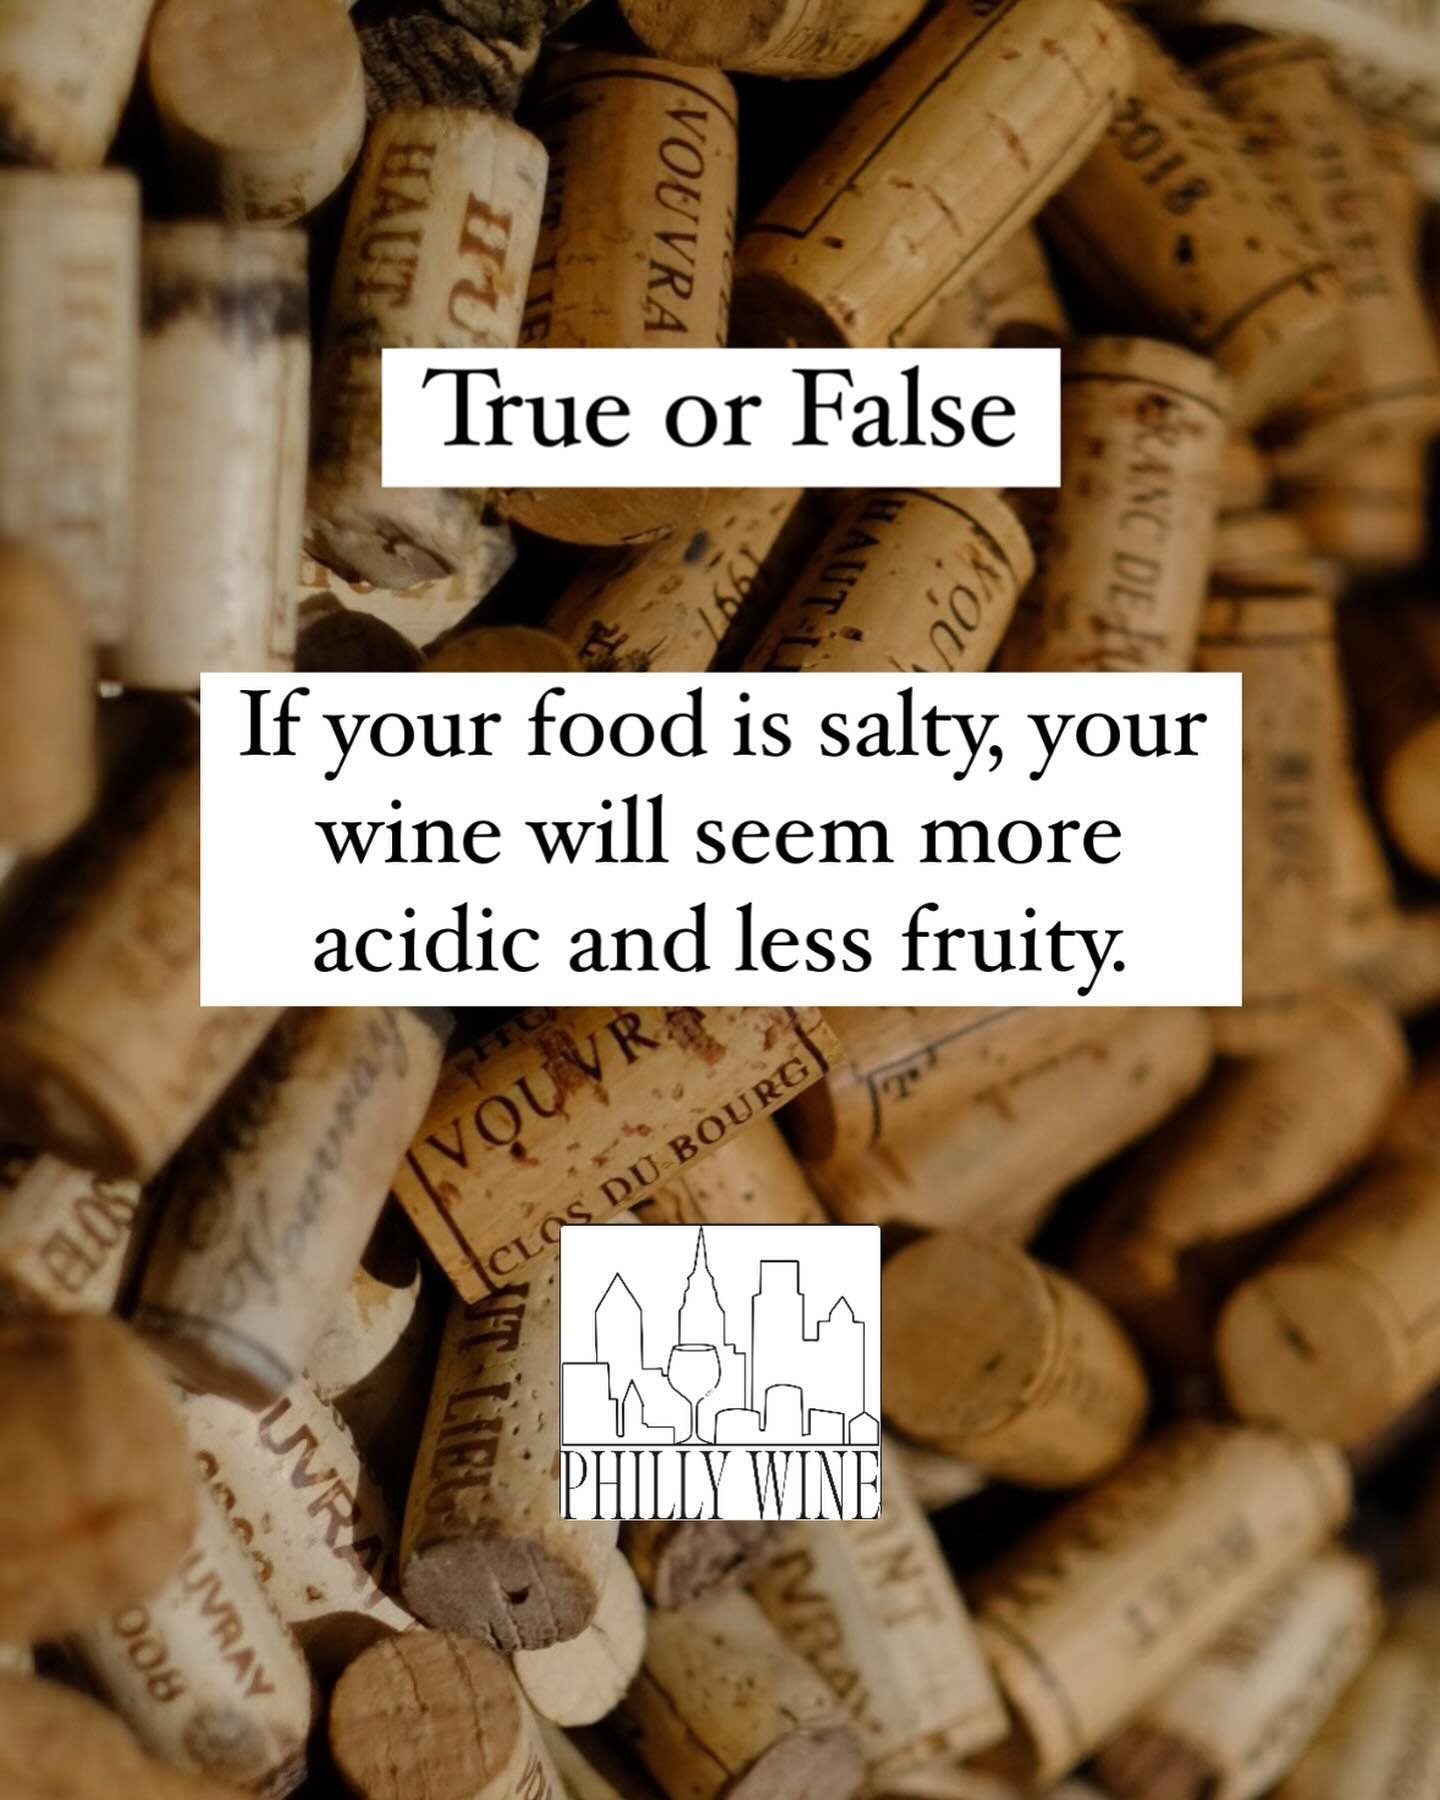 👉🏼 - With our recent @wsetglobal Level 1 results ready to arrive at any moment, we thought we&rsquo;d take it back to basics for this week&rsquo;s #winefact #wednesday 

📌 - As we all know, @wsetglobal LOVES to trick us when it comes to flavor com